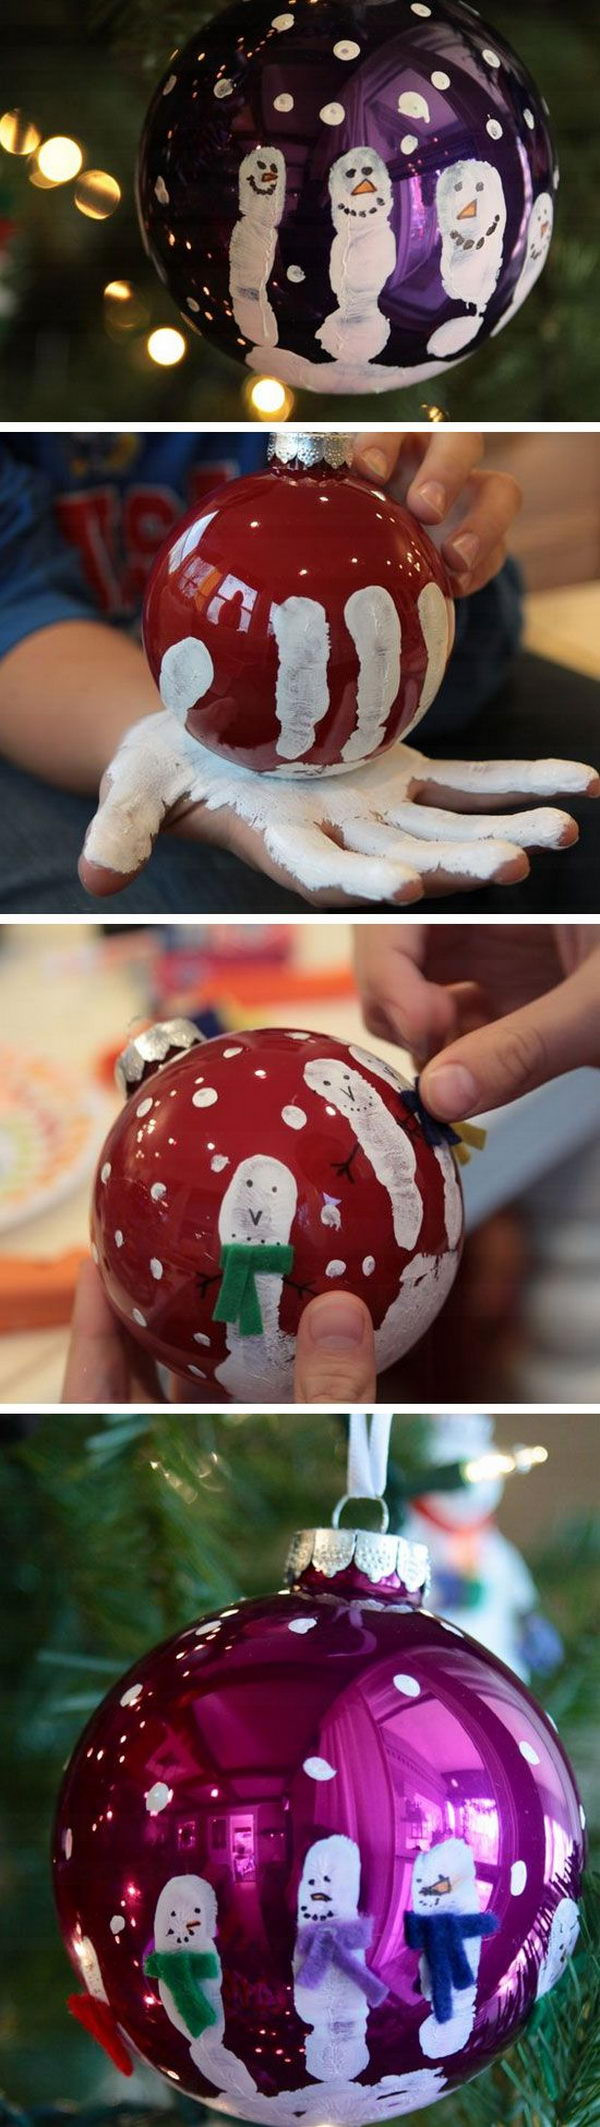 DIY Crafts For Toddlers
 Easy & Creative Christmas DIY Projects That Kids Can Do